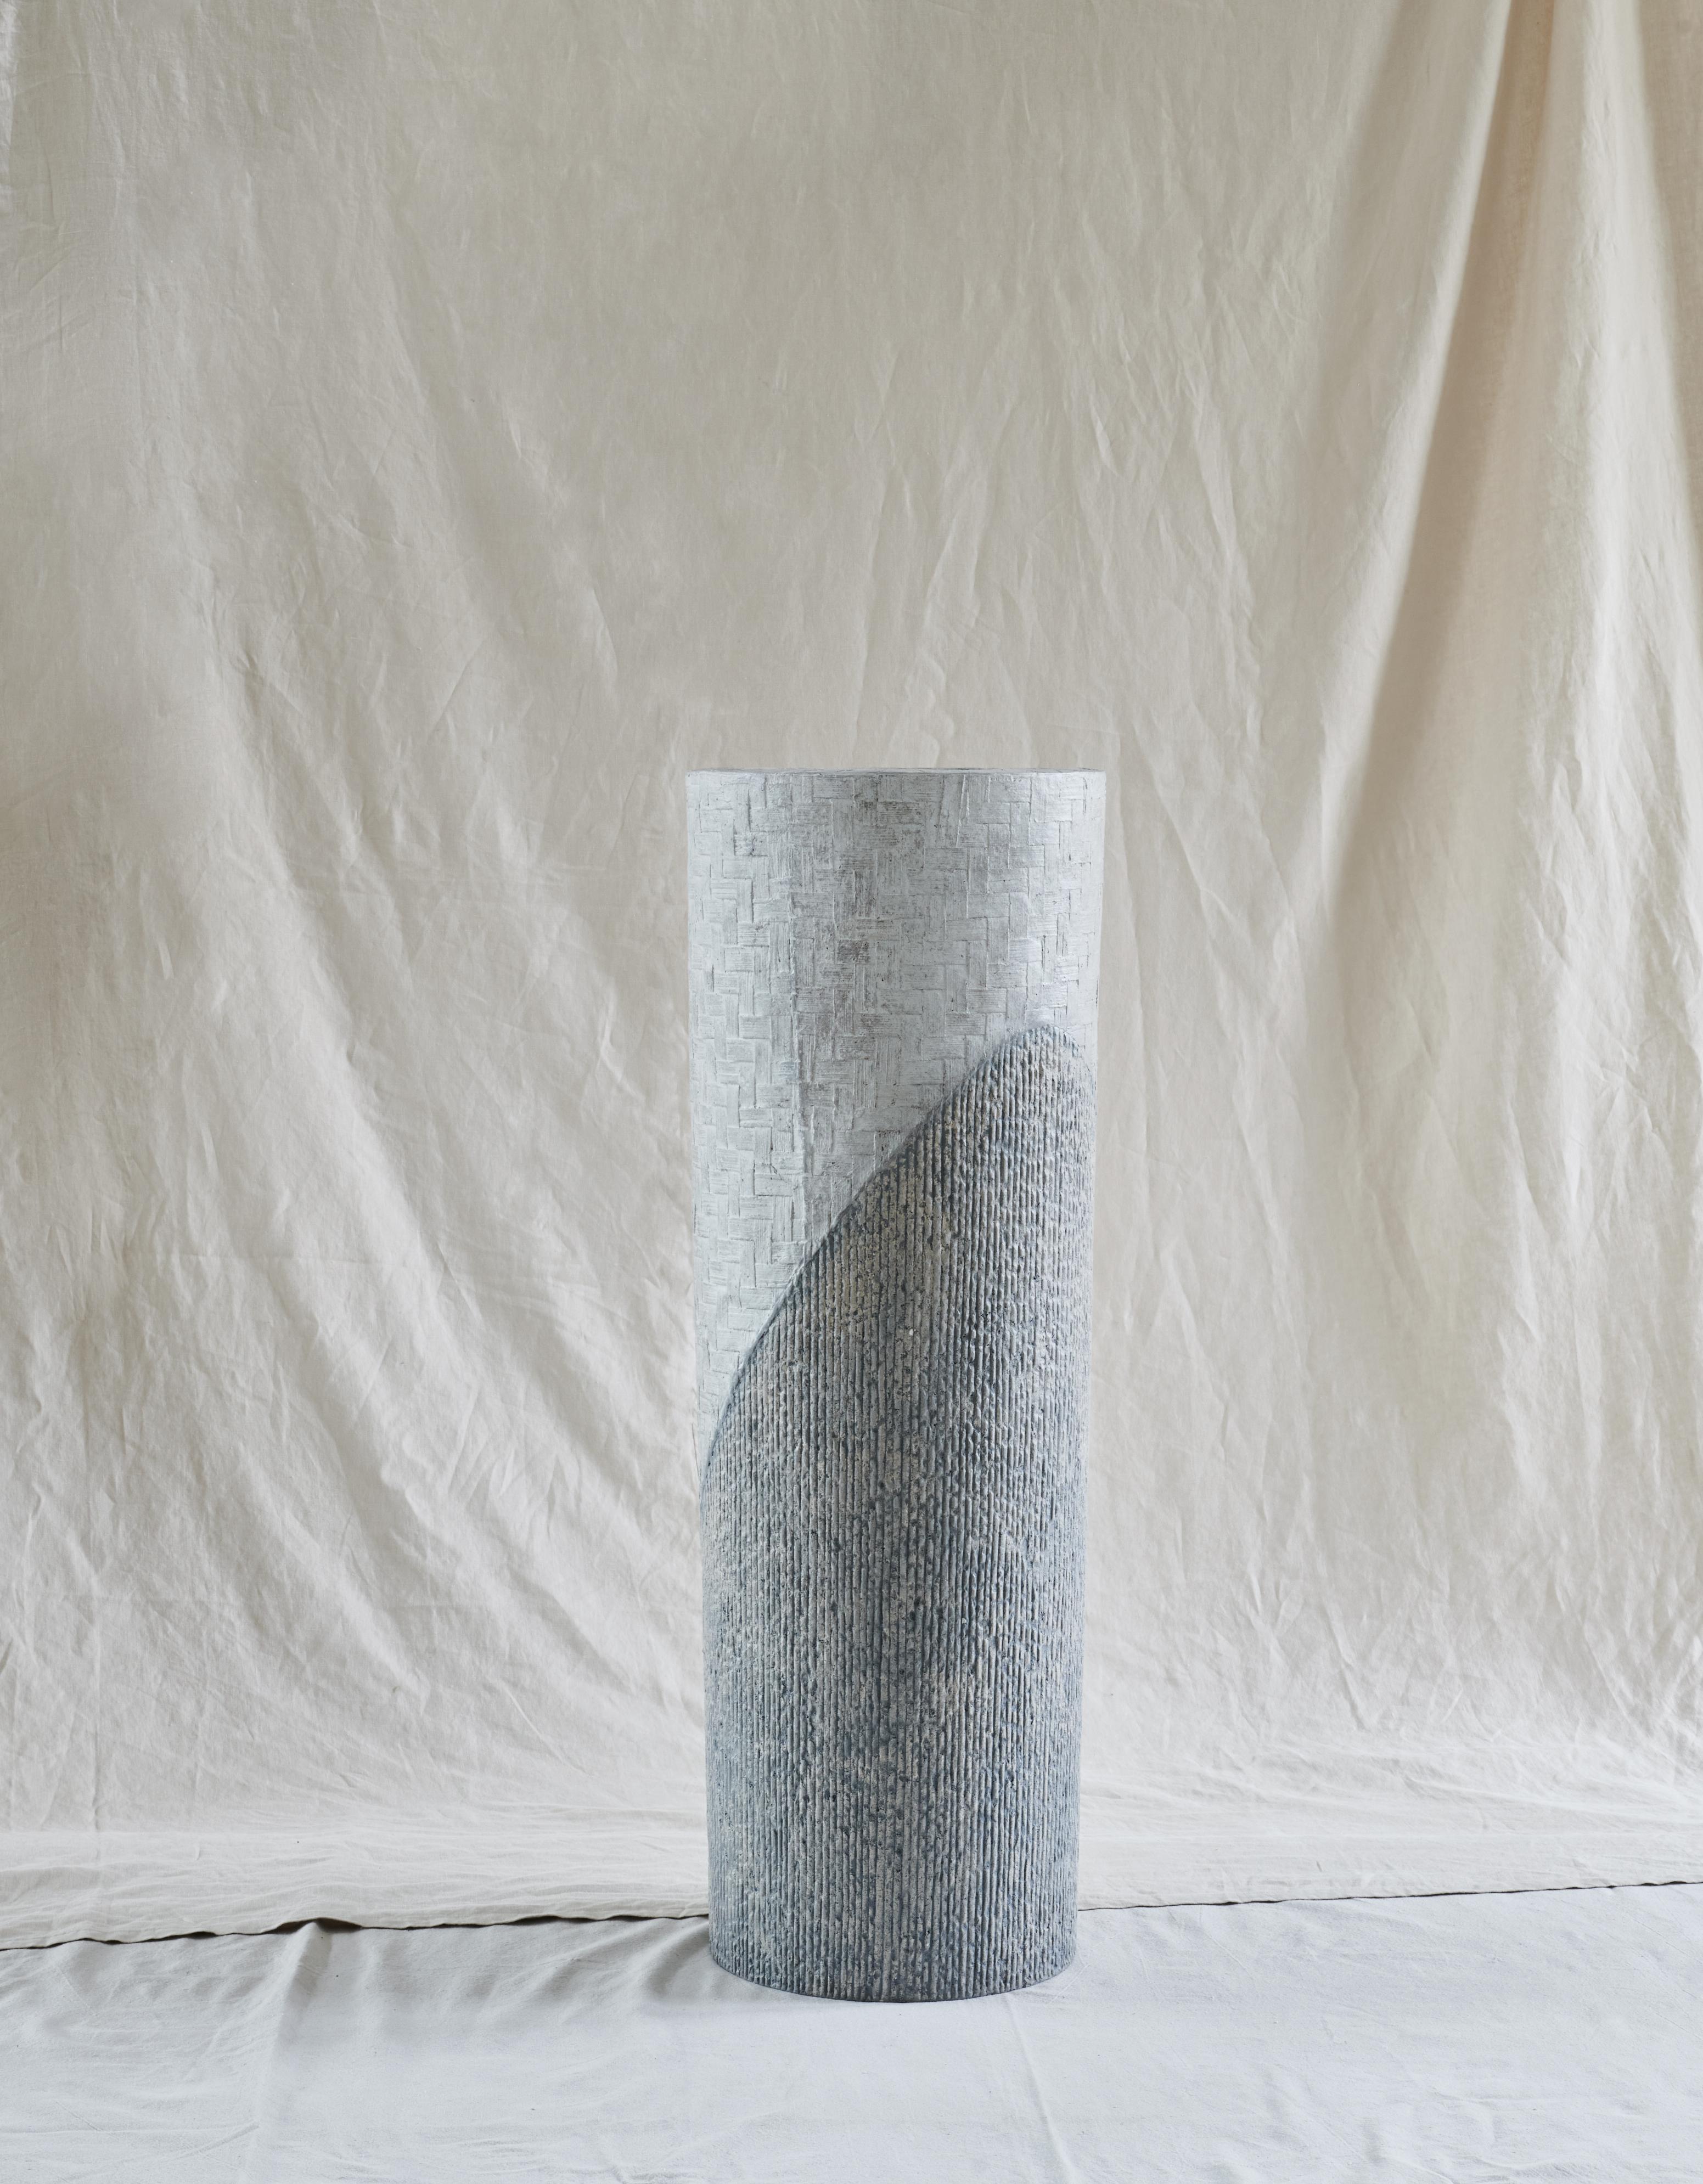 Cast Tall White & Gray Crushed Limestone & Paper Composite Vessel by Studio Laurence For Sale